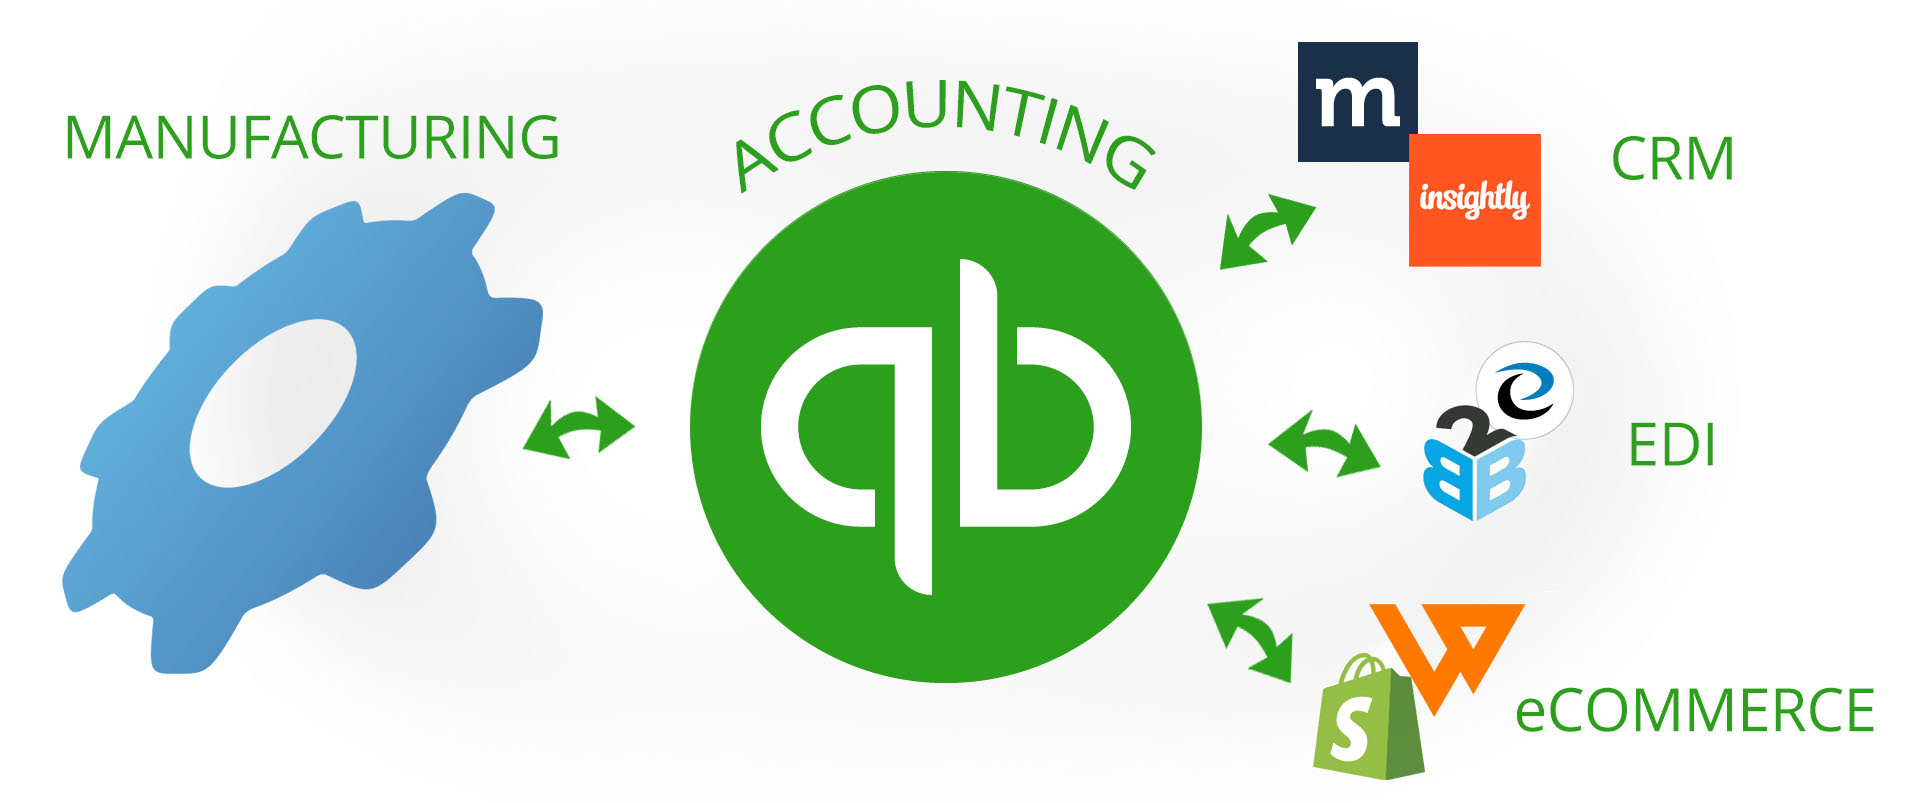 MISys Manufacturing is part of the vast QuickBooks ecosystem. Add CRM, EDI, eCommerce and more.